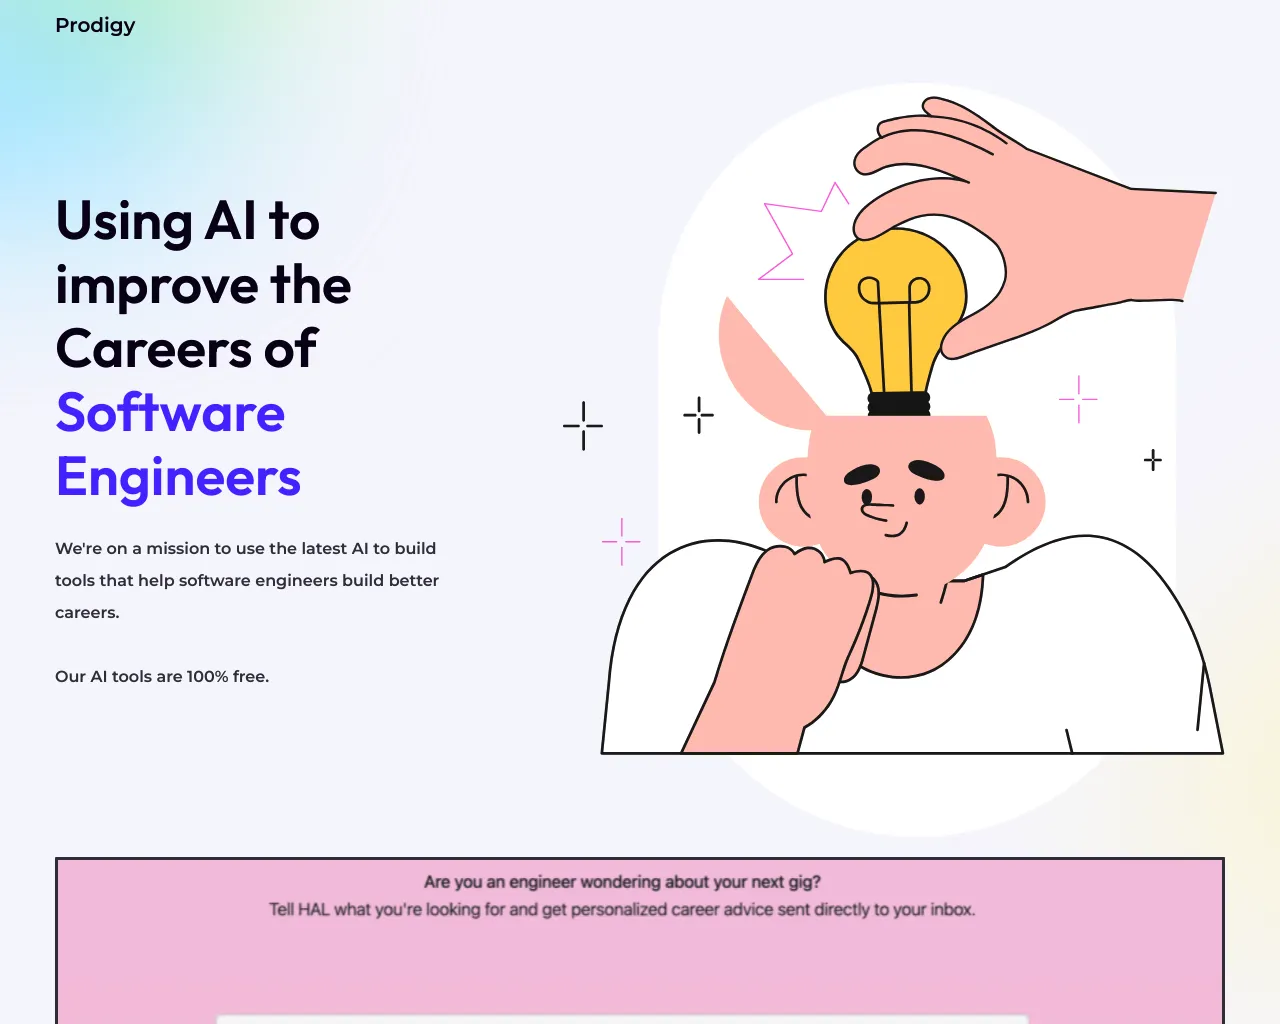 Using AI to Improve the Careers of Software Engineers